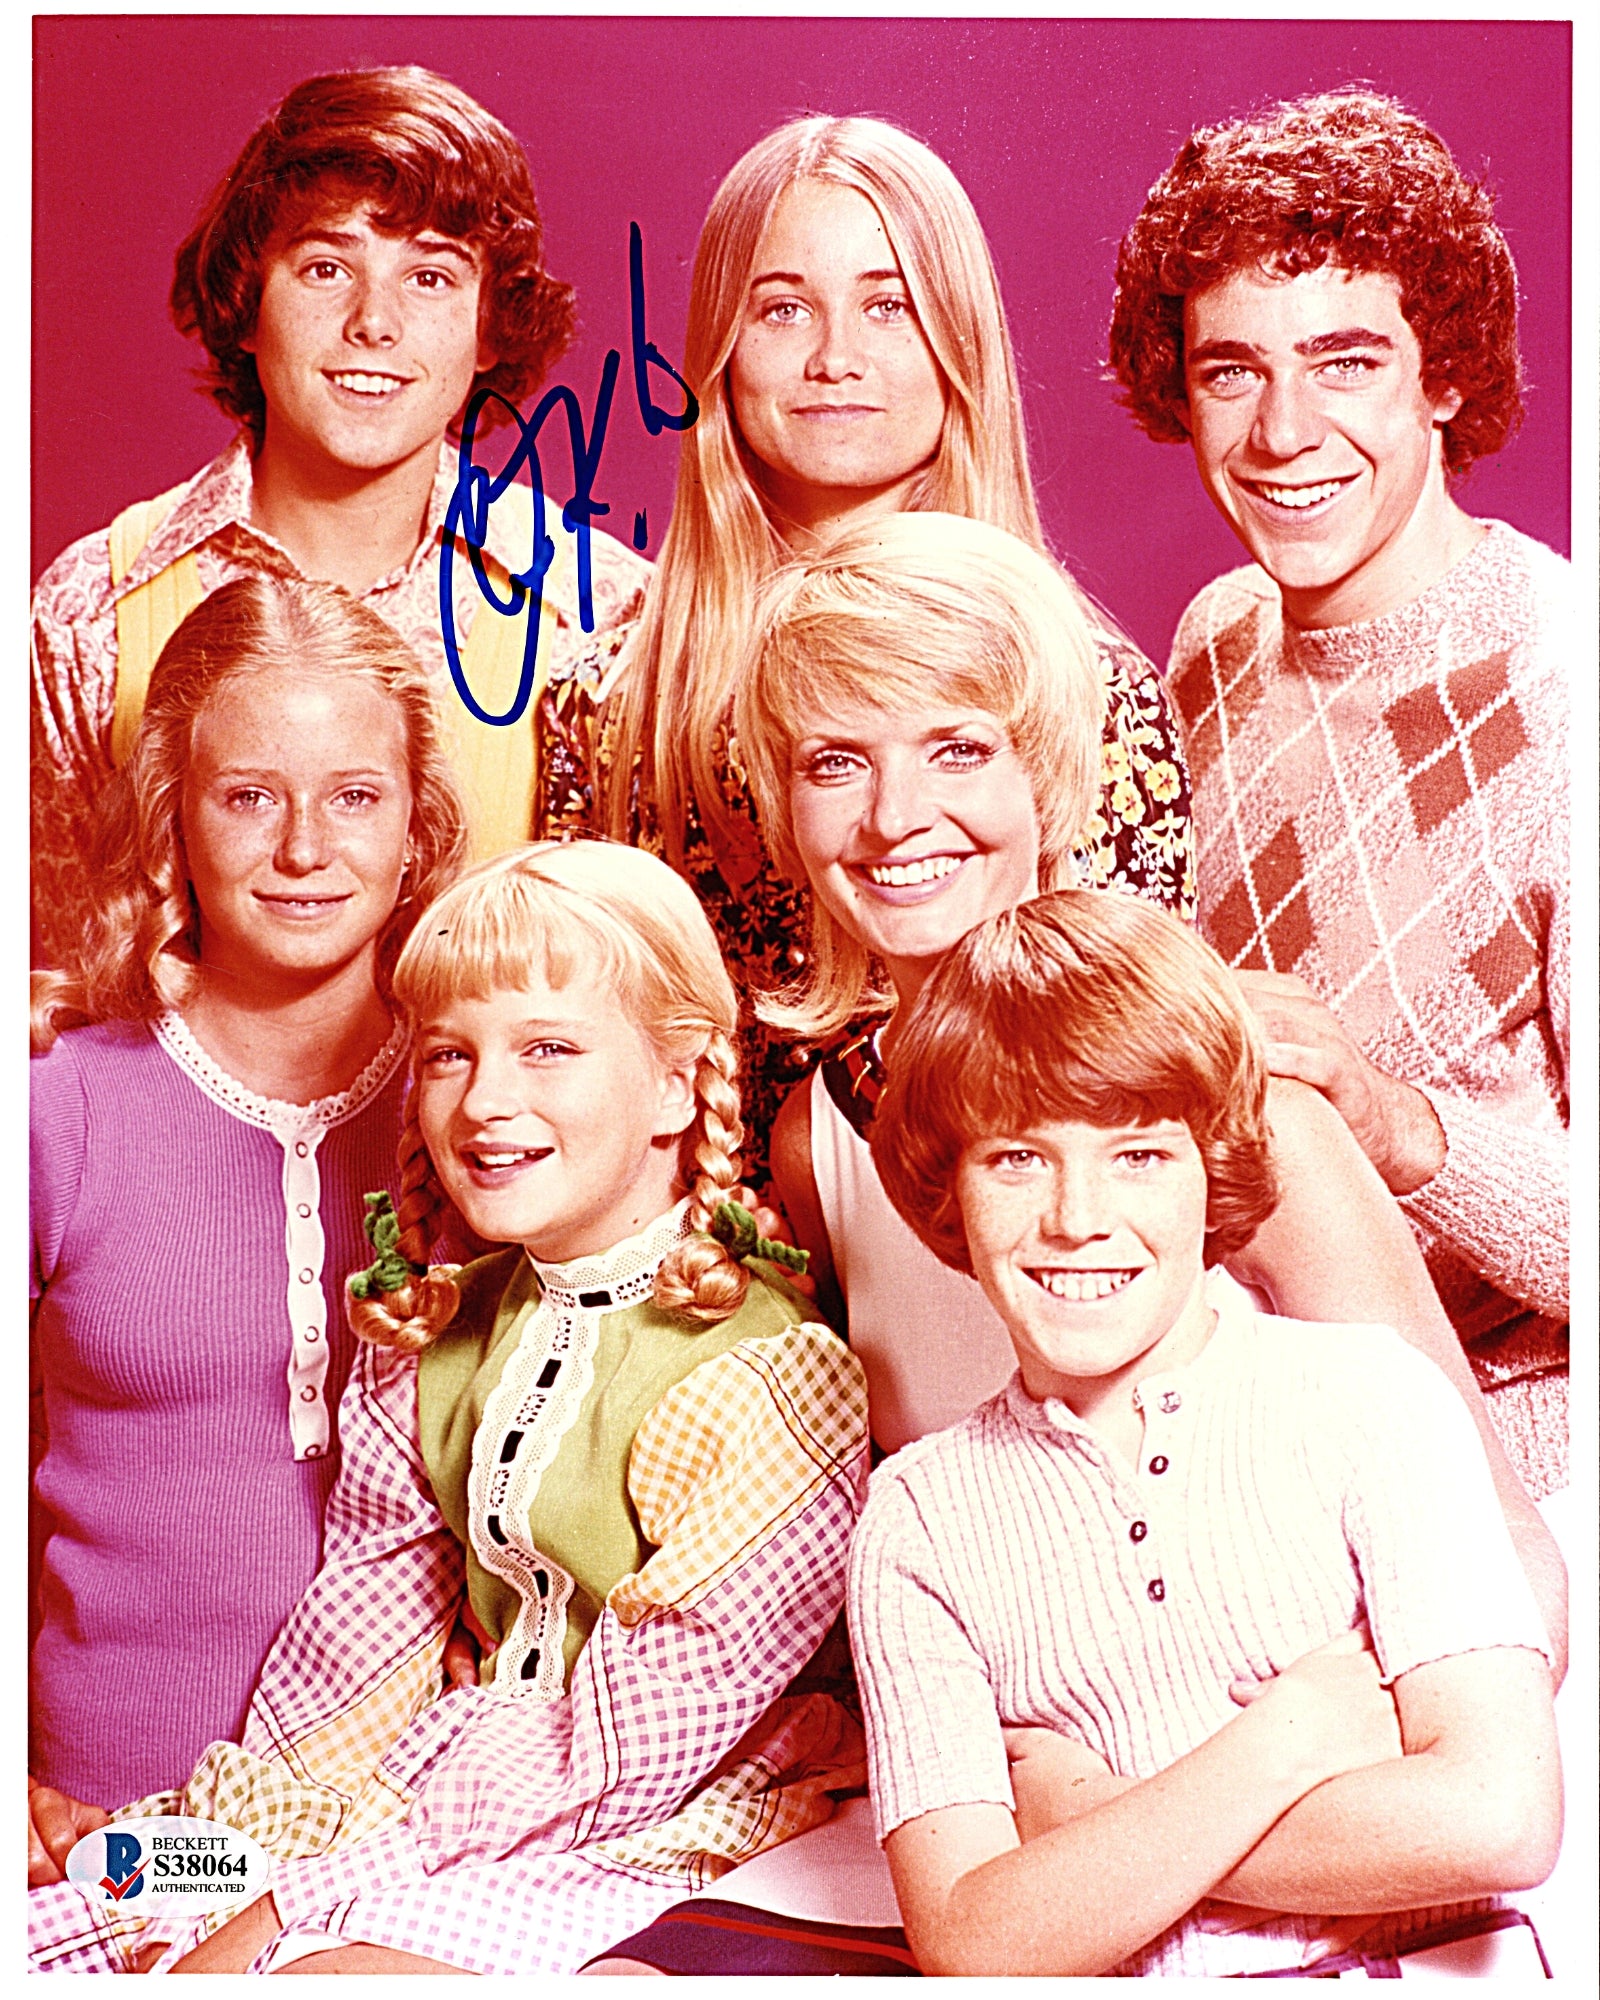 Hollywood- Autographed- Christopher Knight Signed The Brady Bunch Cast 8x10 Photo Beckett Authentication Services BAS S38064 - 102